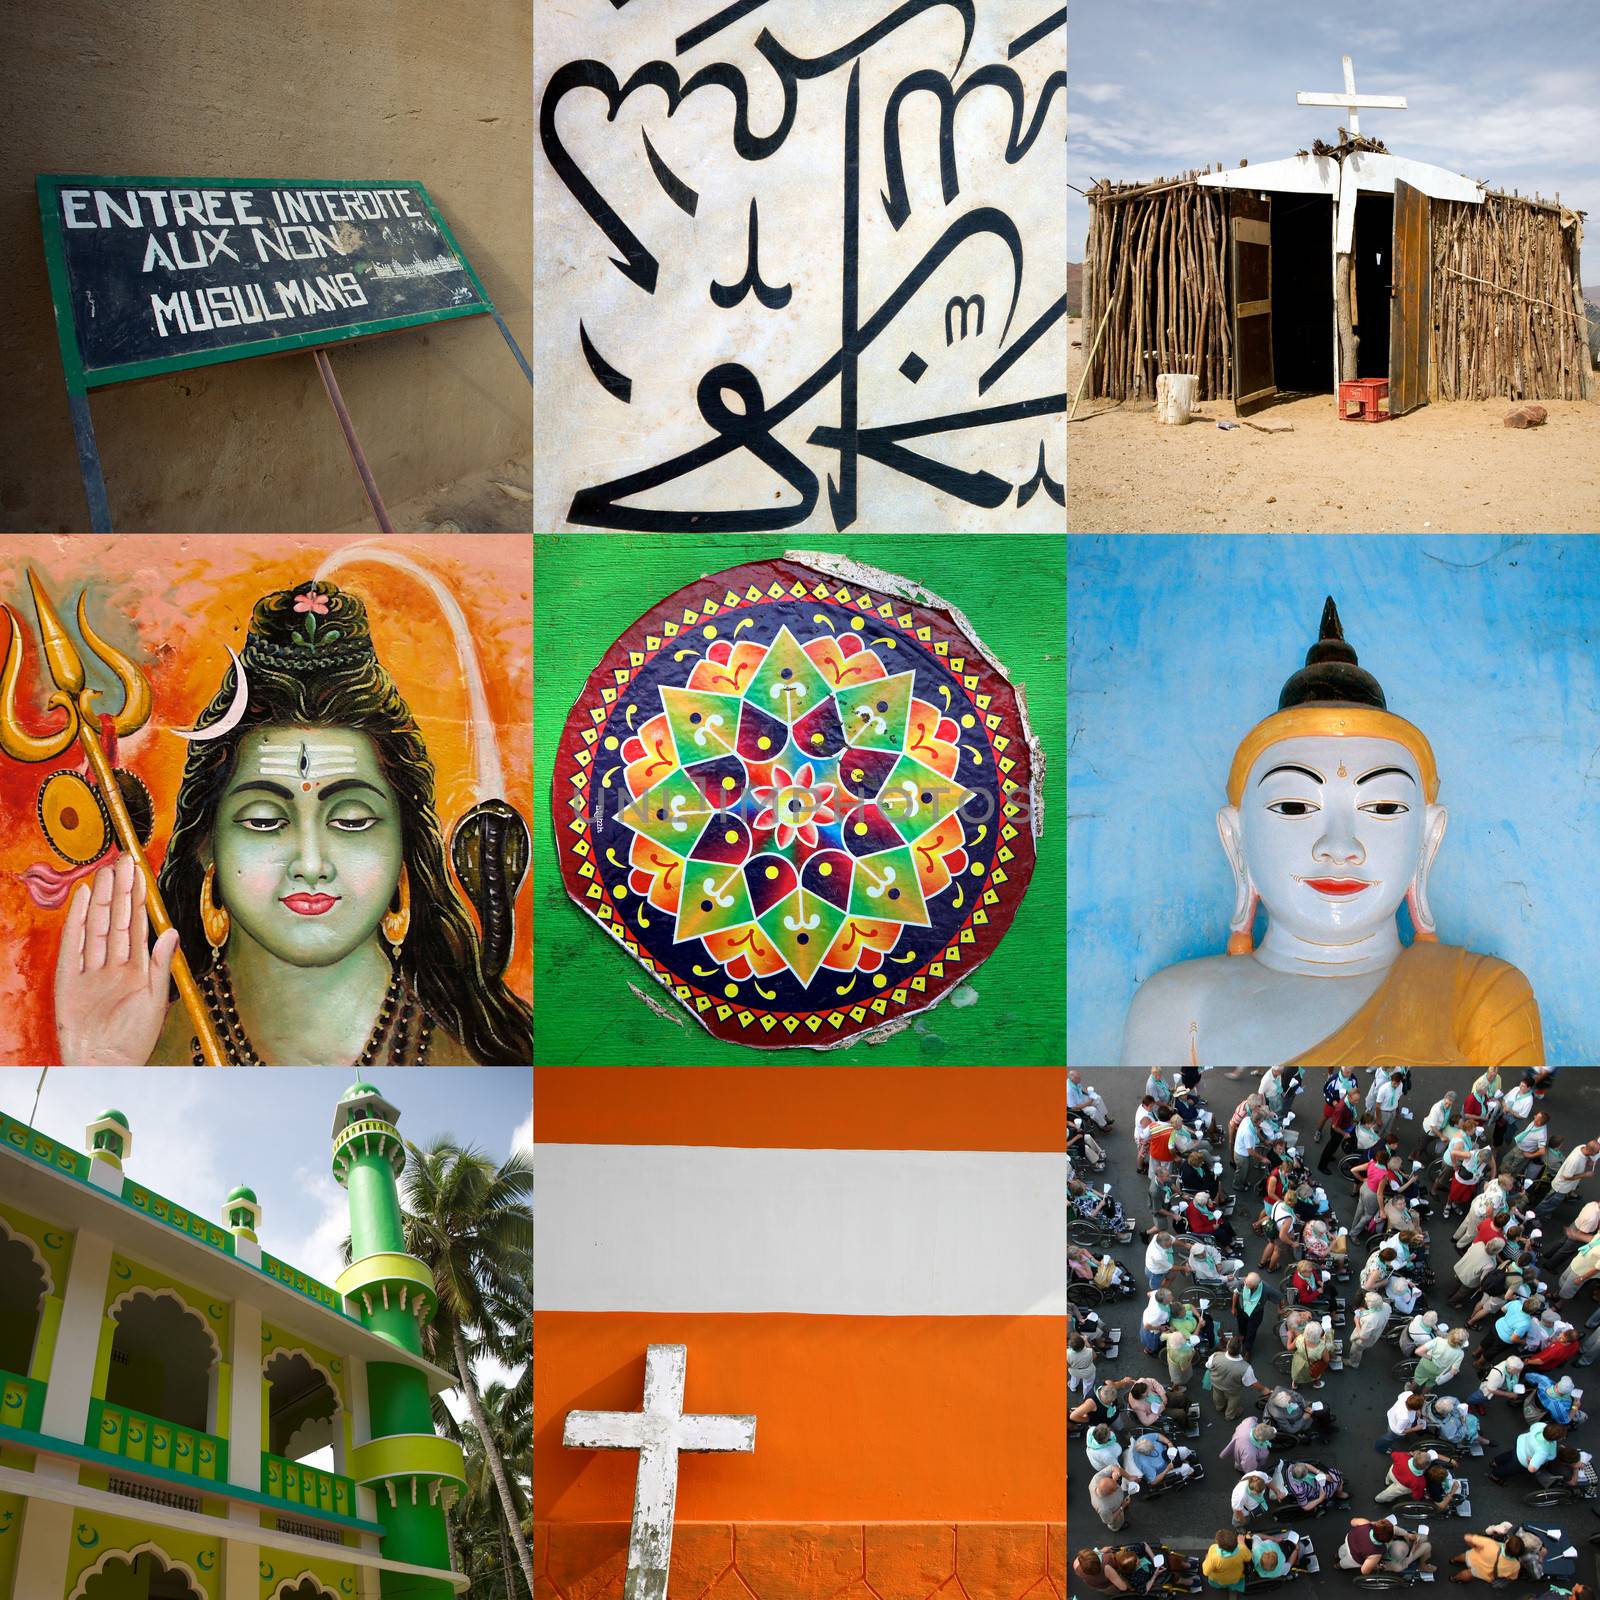 Various symbols representing the various religions of the world